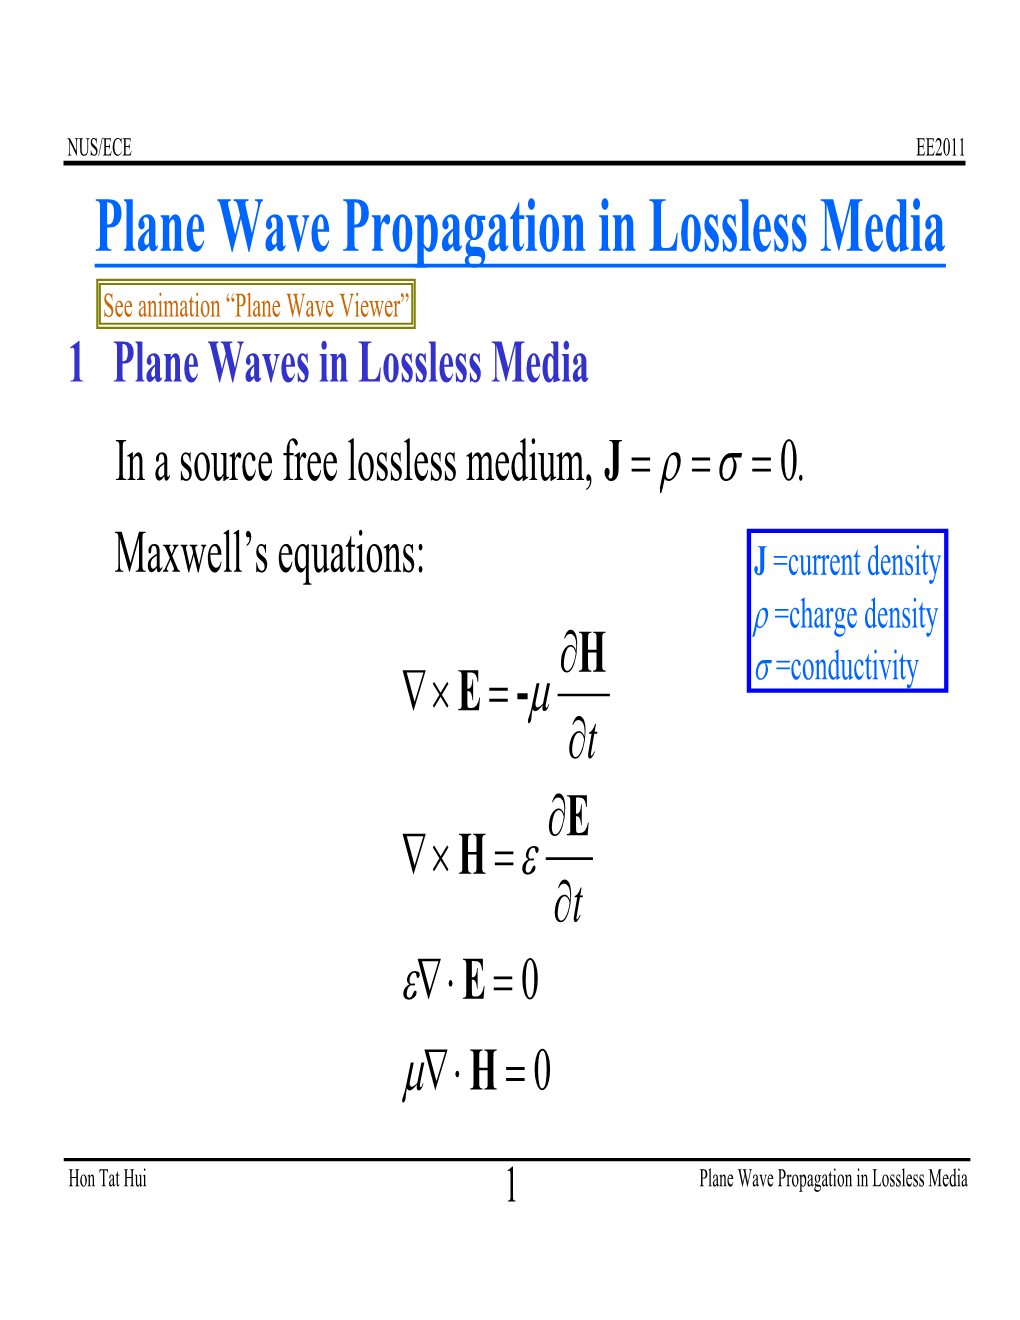 Plane Wave Propagation in Lossless Media See Animation “Plane Wave Viewer” 1 Plane Waves in Lossless Media in a Source Free Lossless Medium, J = Ρ = Σ = 0